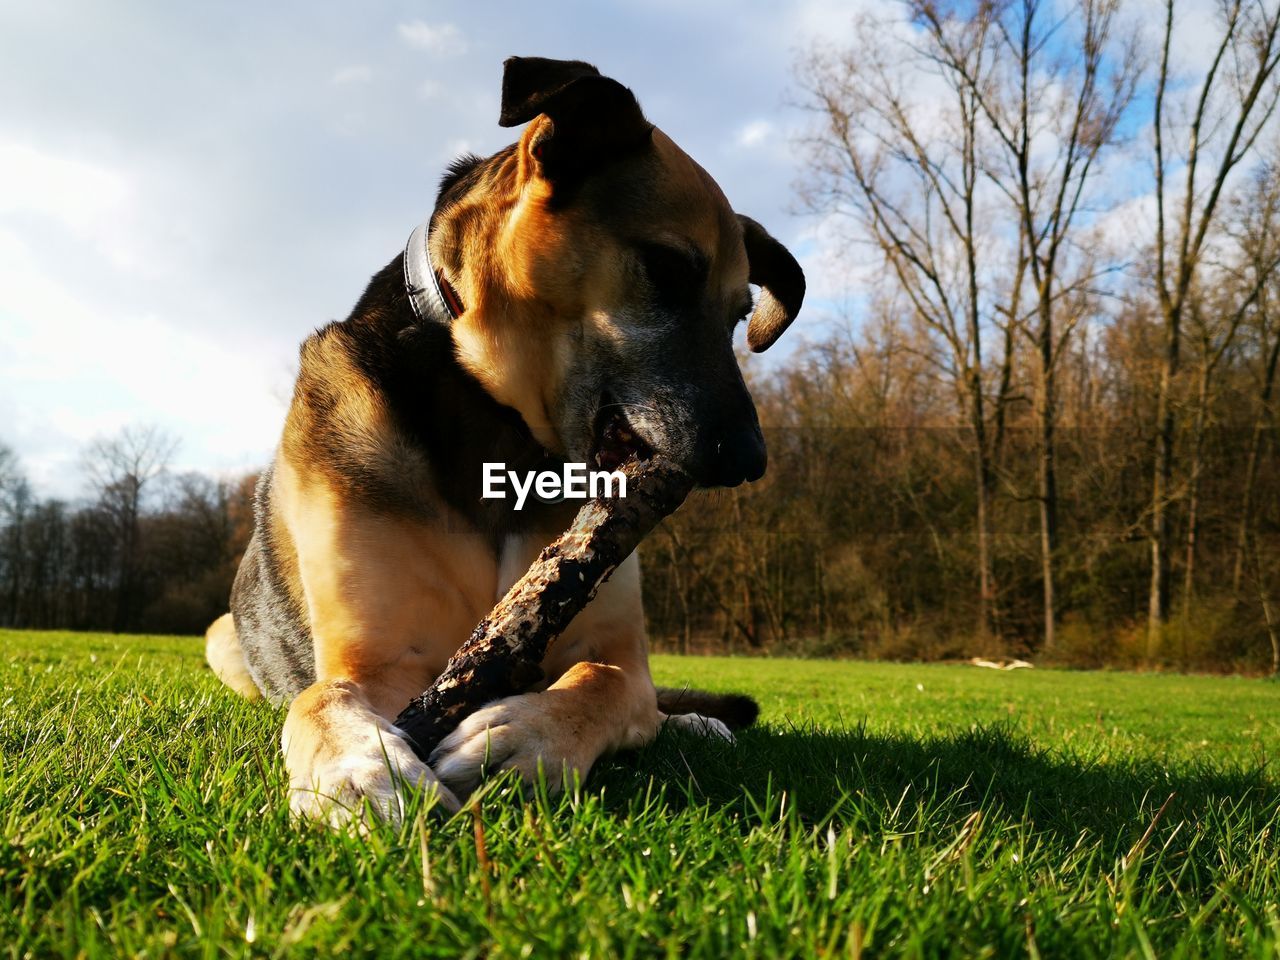 Dog looking away on field chewing on wooden stick